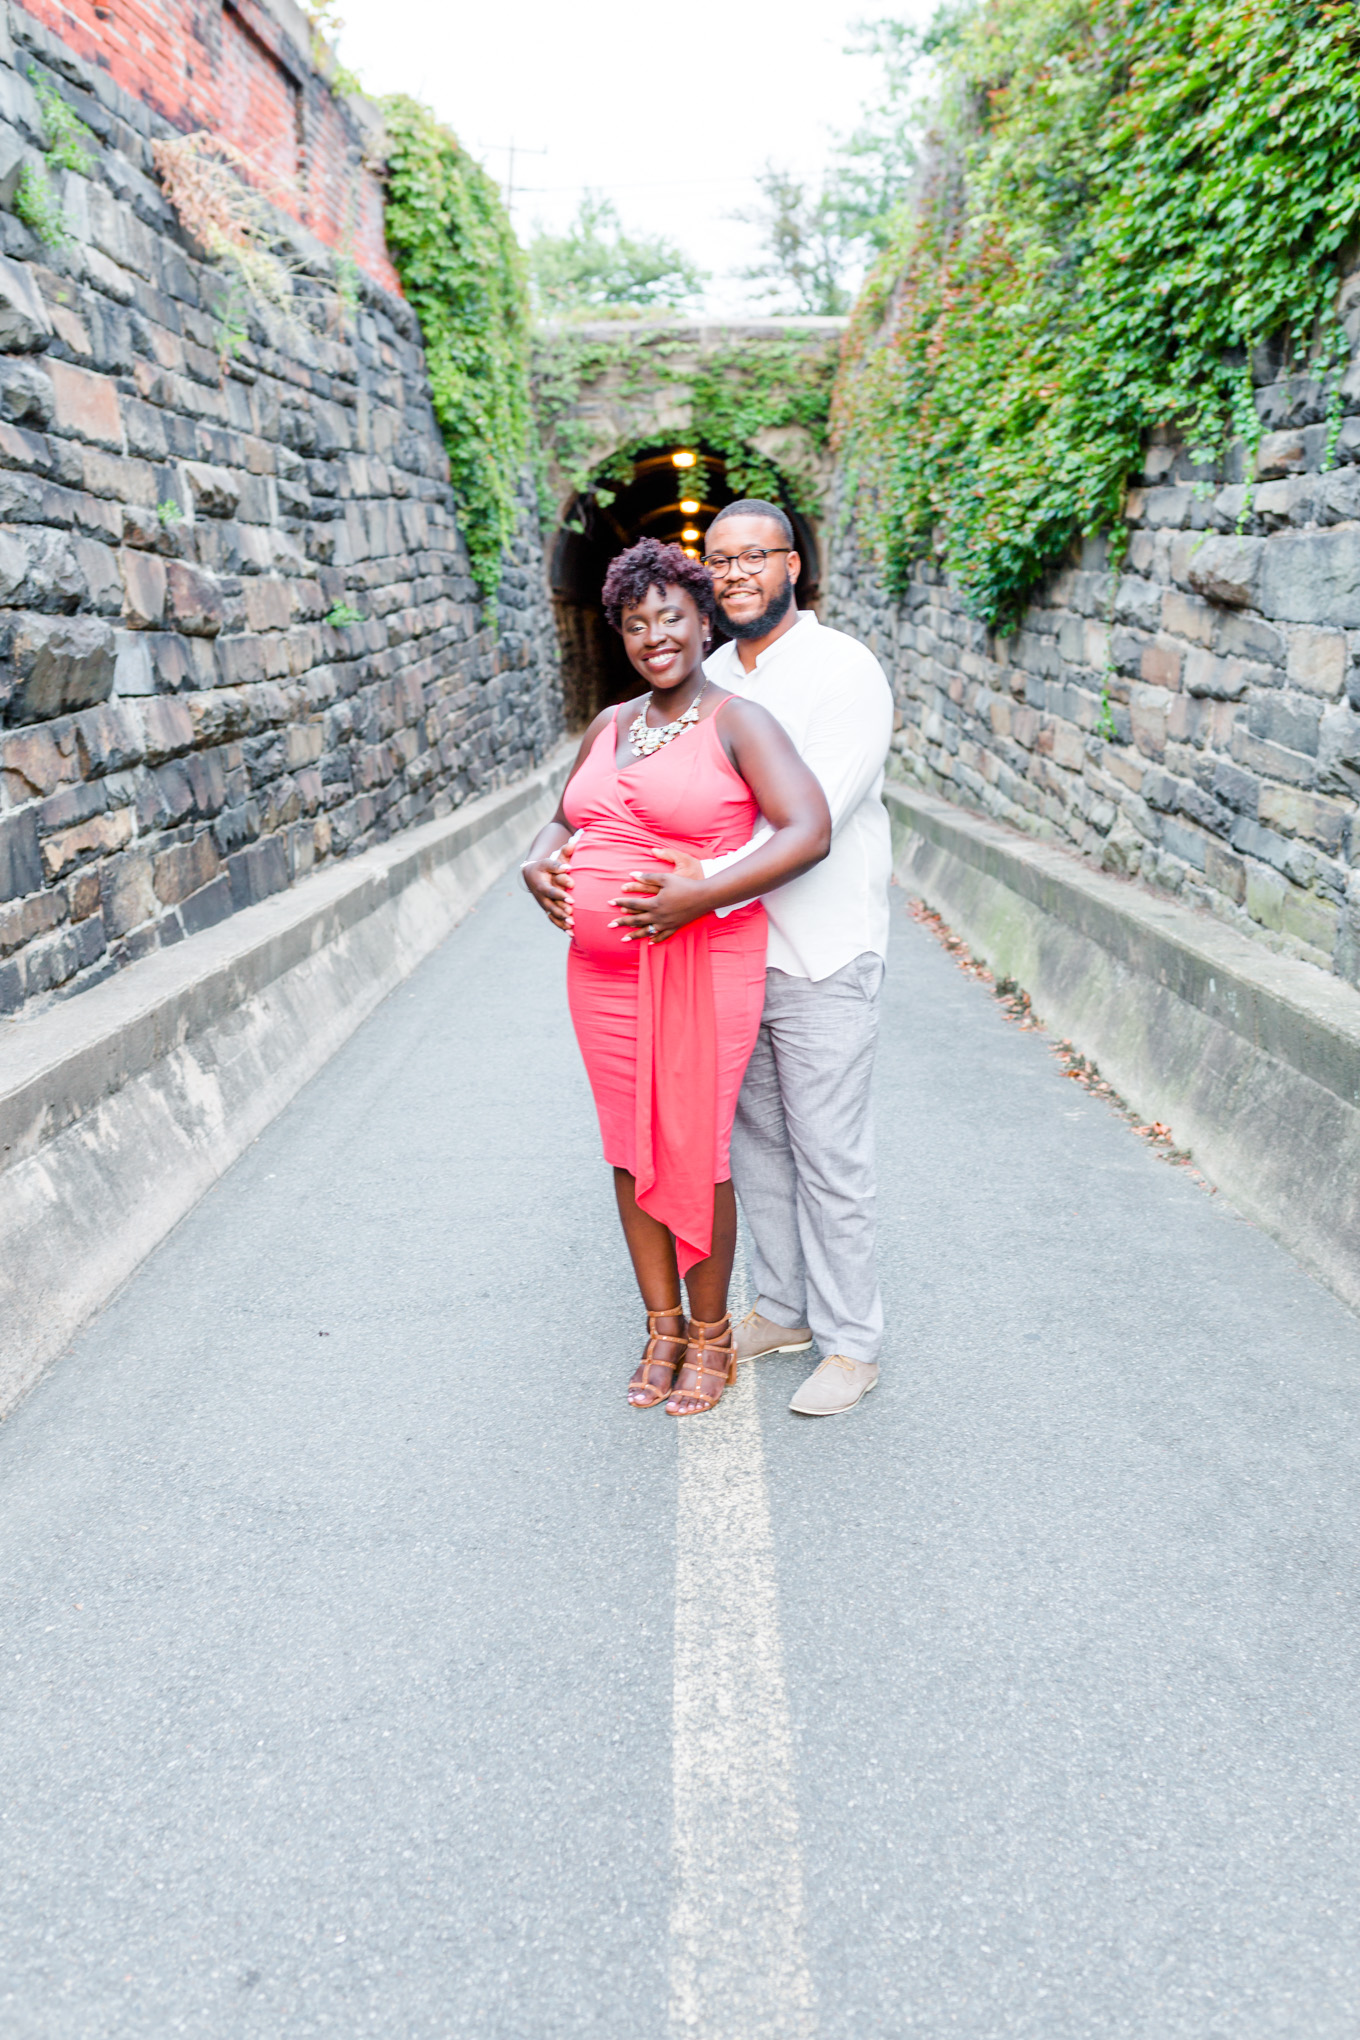 Wilkes Street Tunnel maternity photos, maternity style, coral dress, married couple, mom to be, dad to be, old town Alexandria, northern Virginia, maternity photographer, Alexandria maternity photographer, magic hour portraits, baby bump